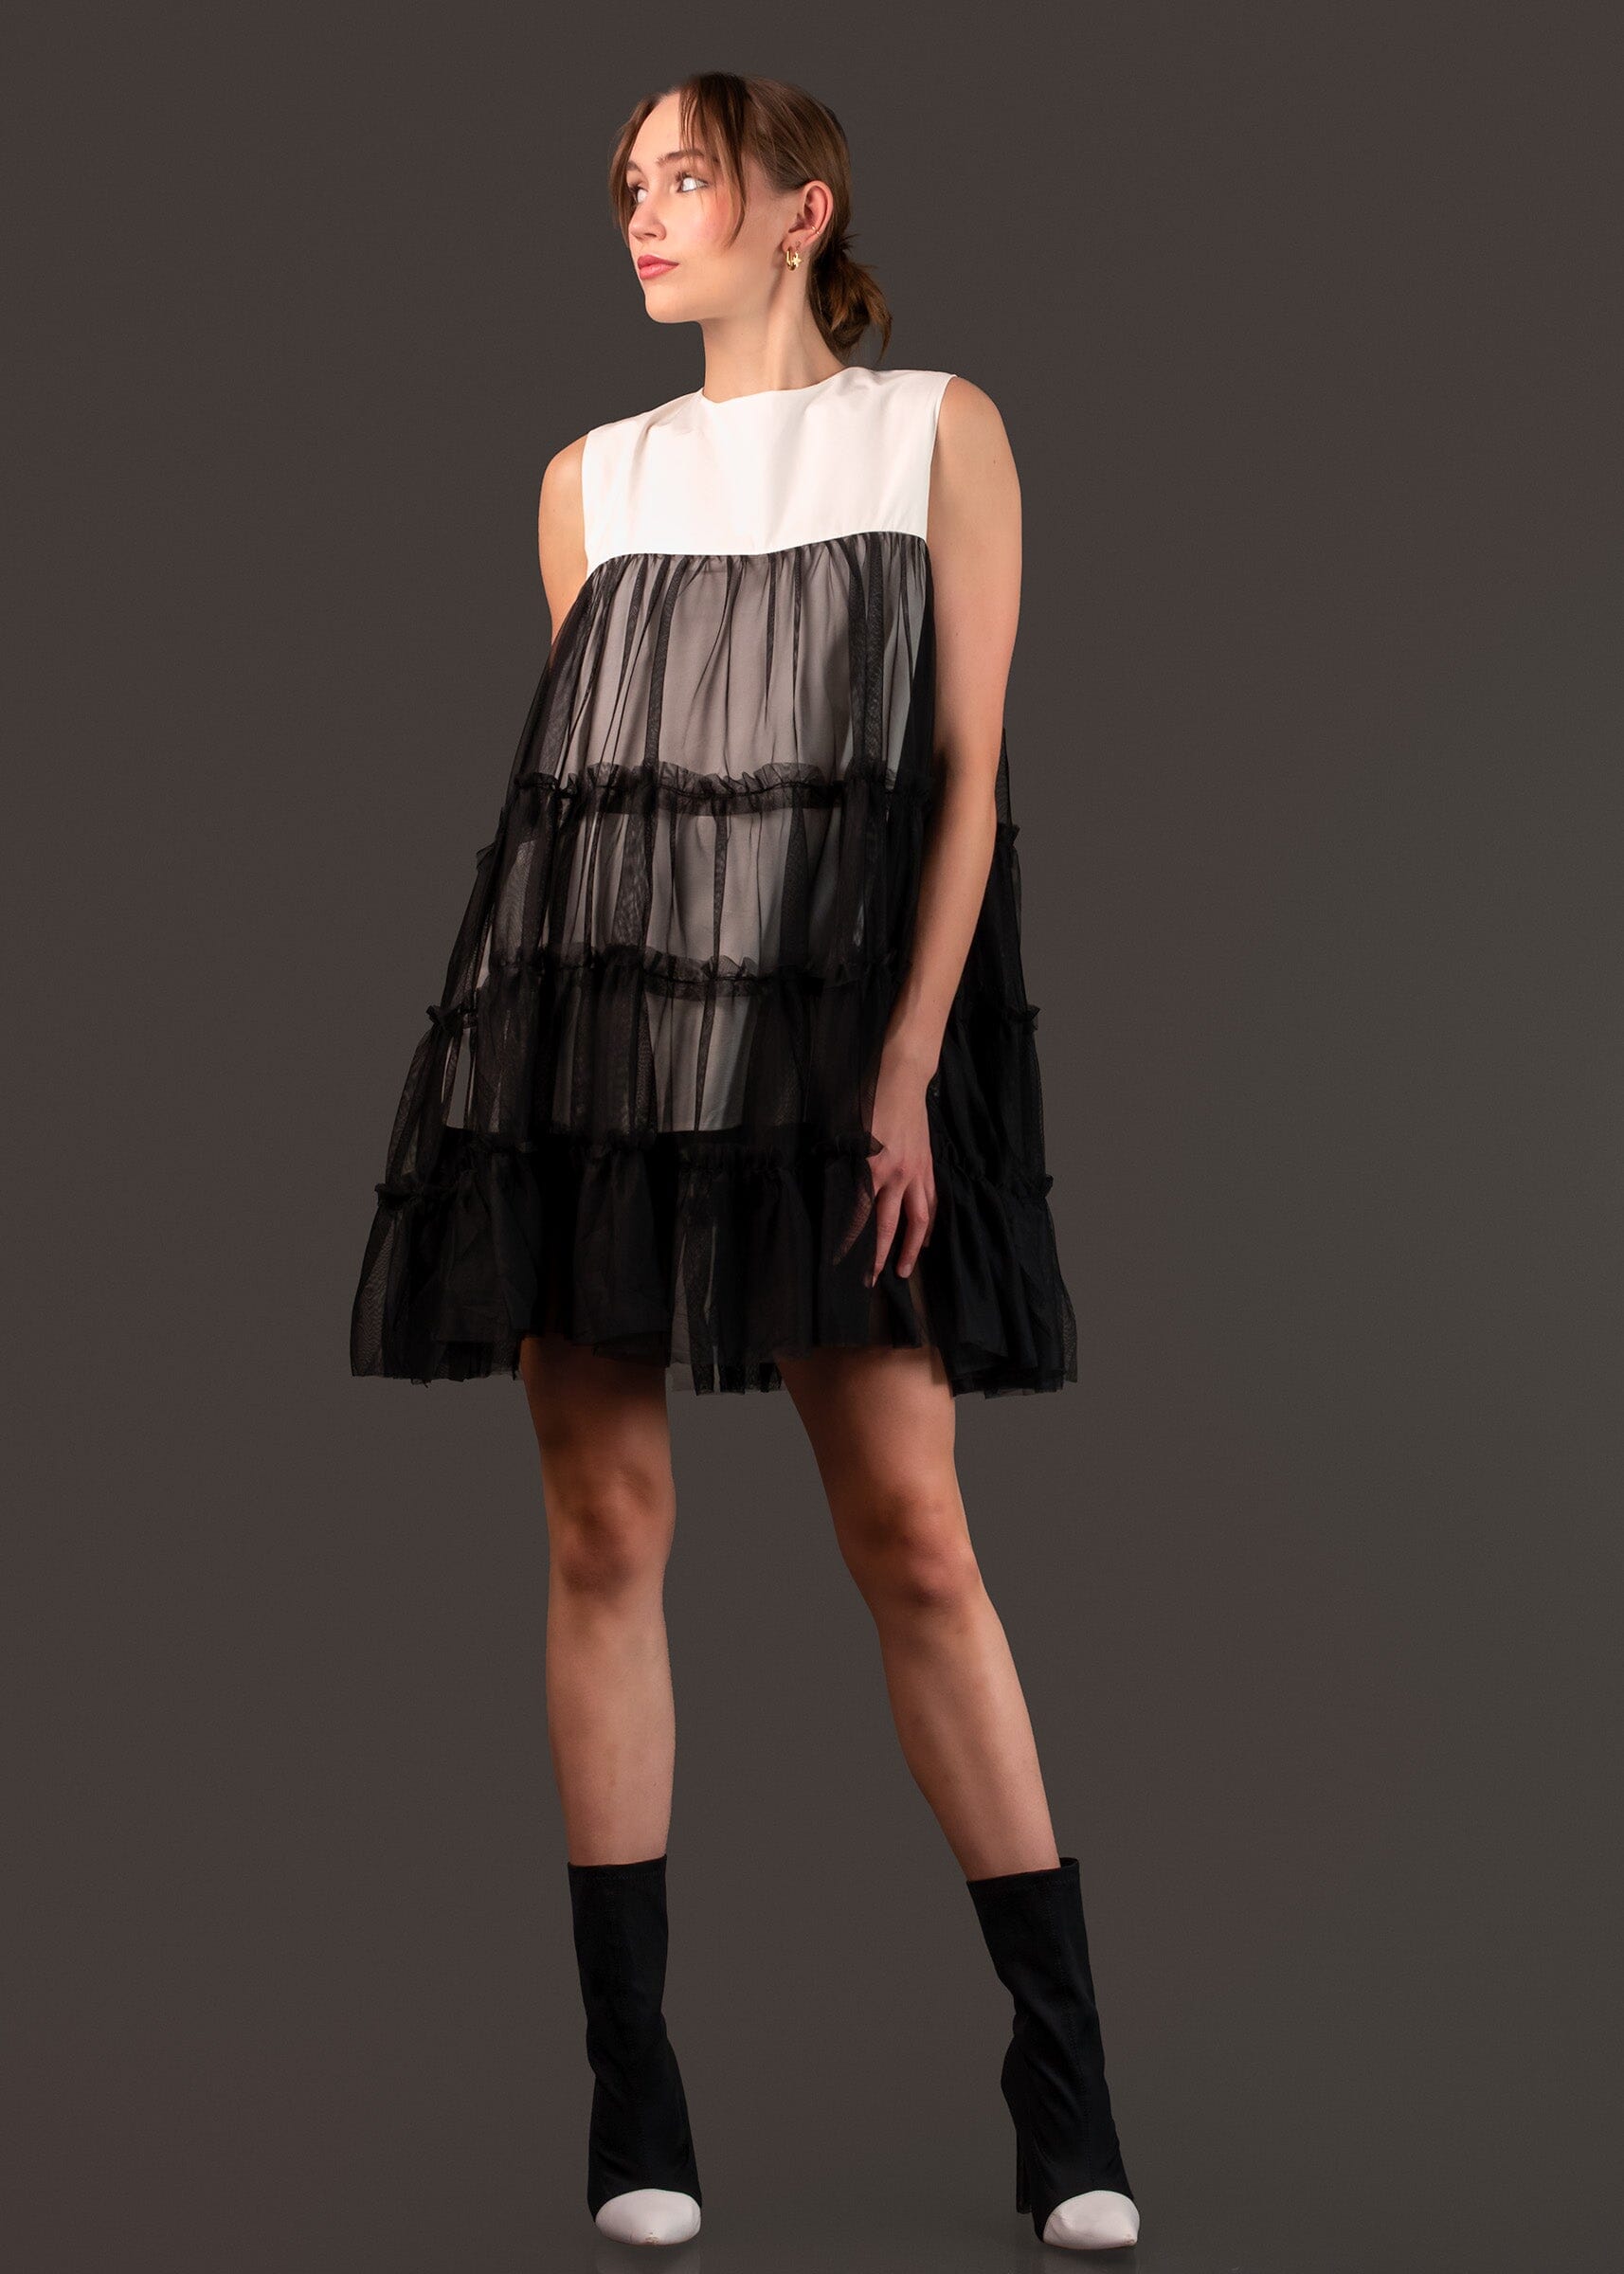 Sleeveless Tulle Baby Doll Tunic Blouses Kate Hewko 